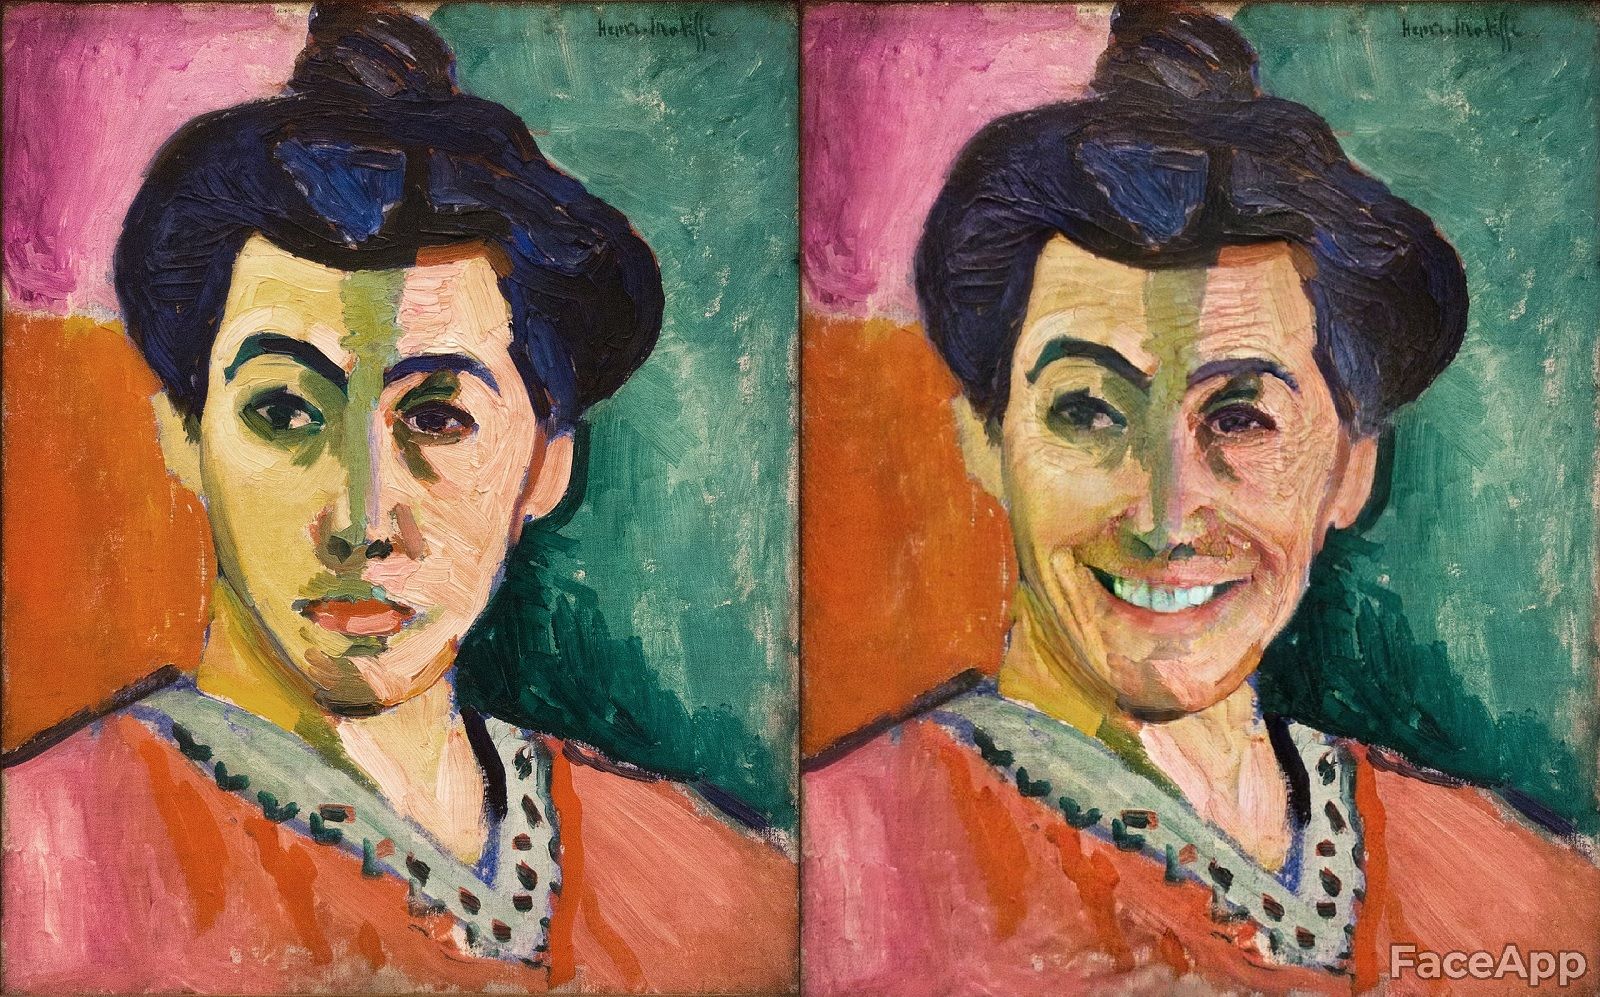 Artwork Re-imagined With Ai Smiles And Old Age Filters image 18